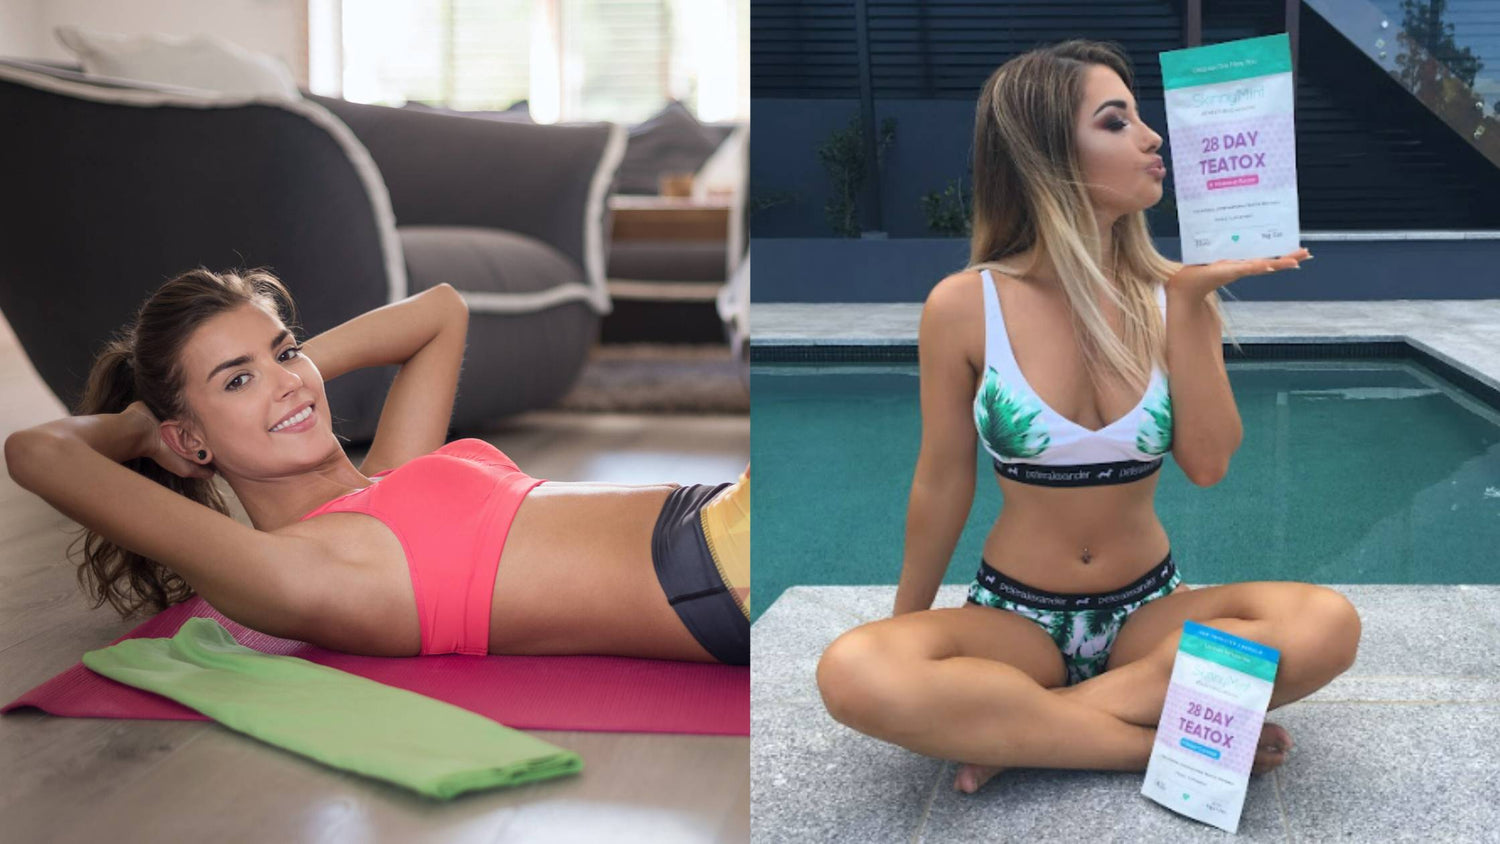 Woman doing crunches and woman drinking 28 Day Teatox to get a flat tummy.